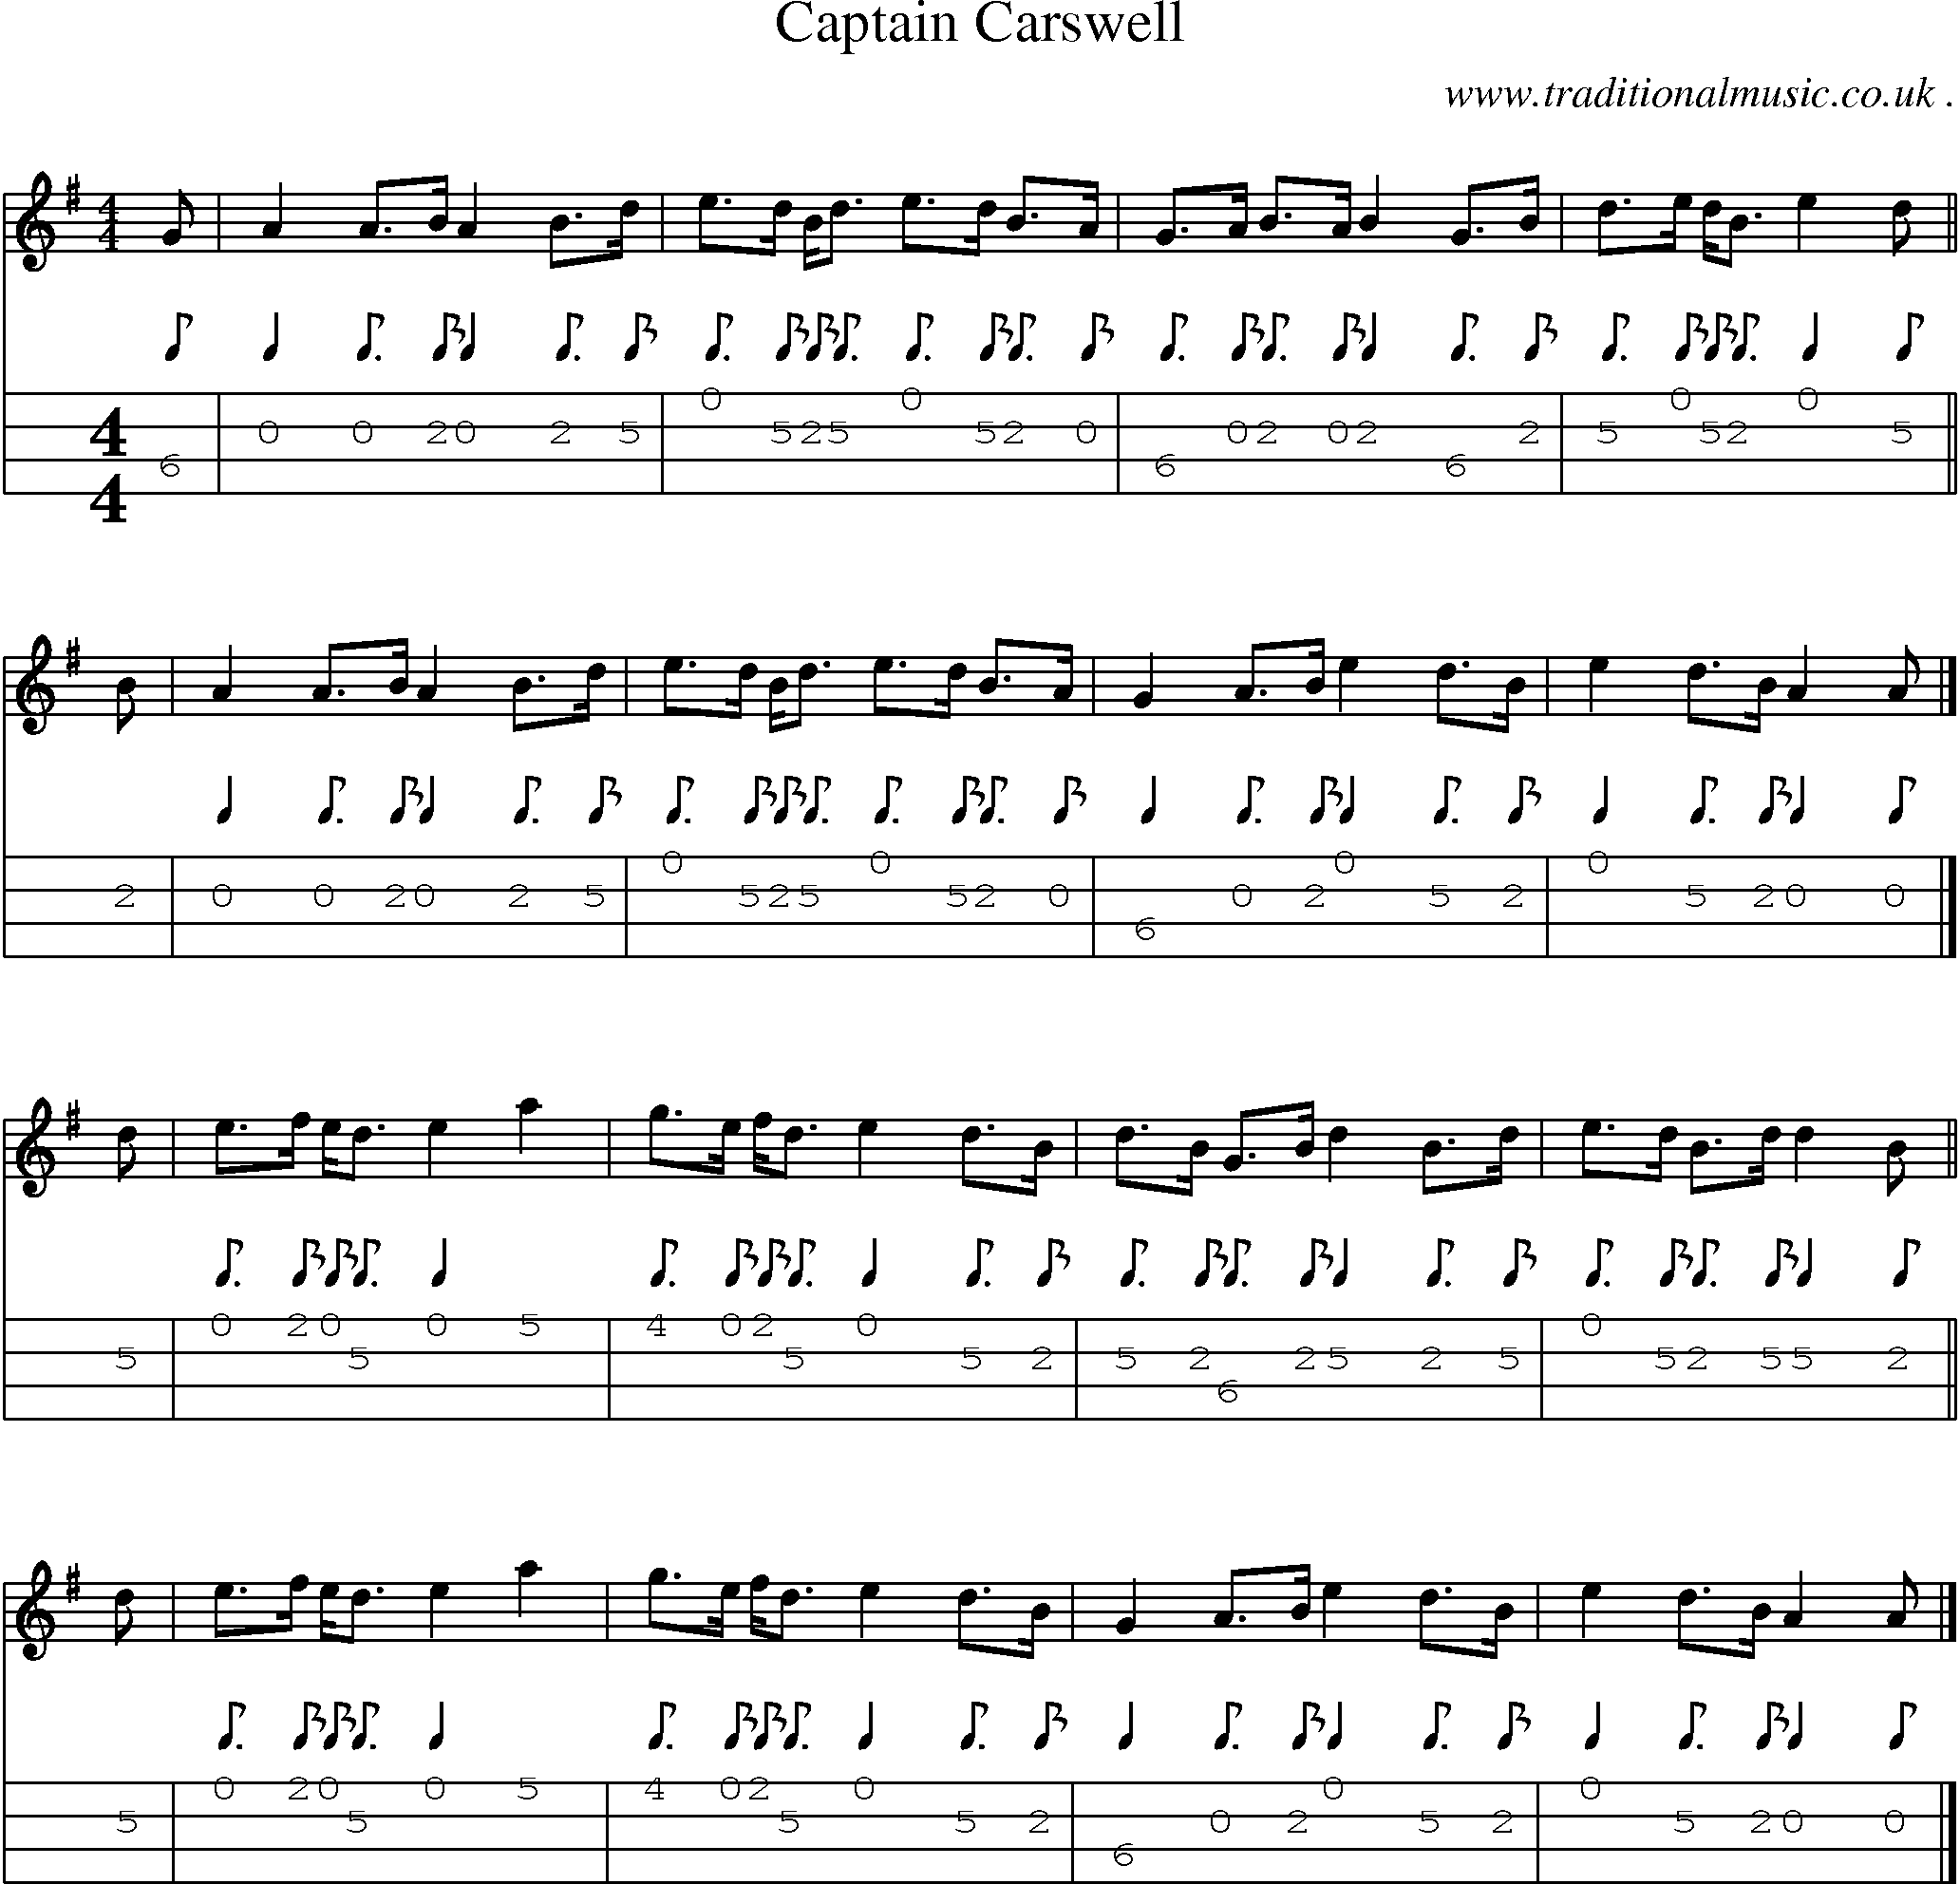 Sheet-music  score, Chords and Mandolin Tabs for Captain Carswell